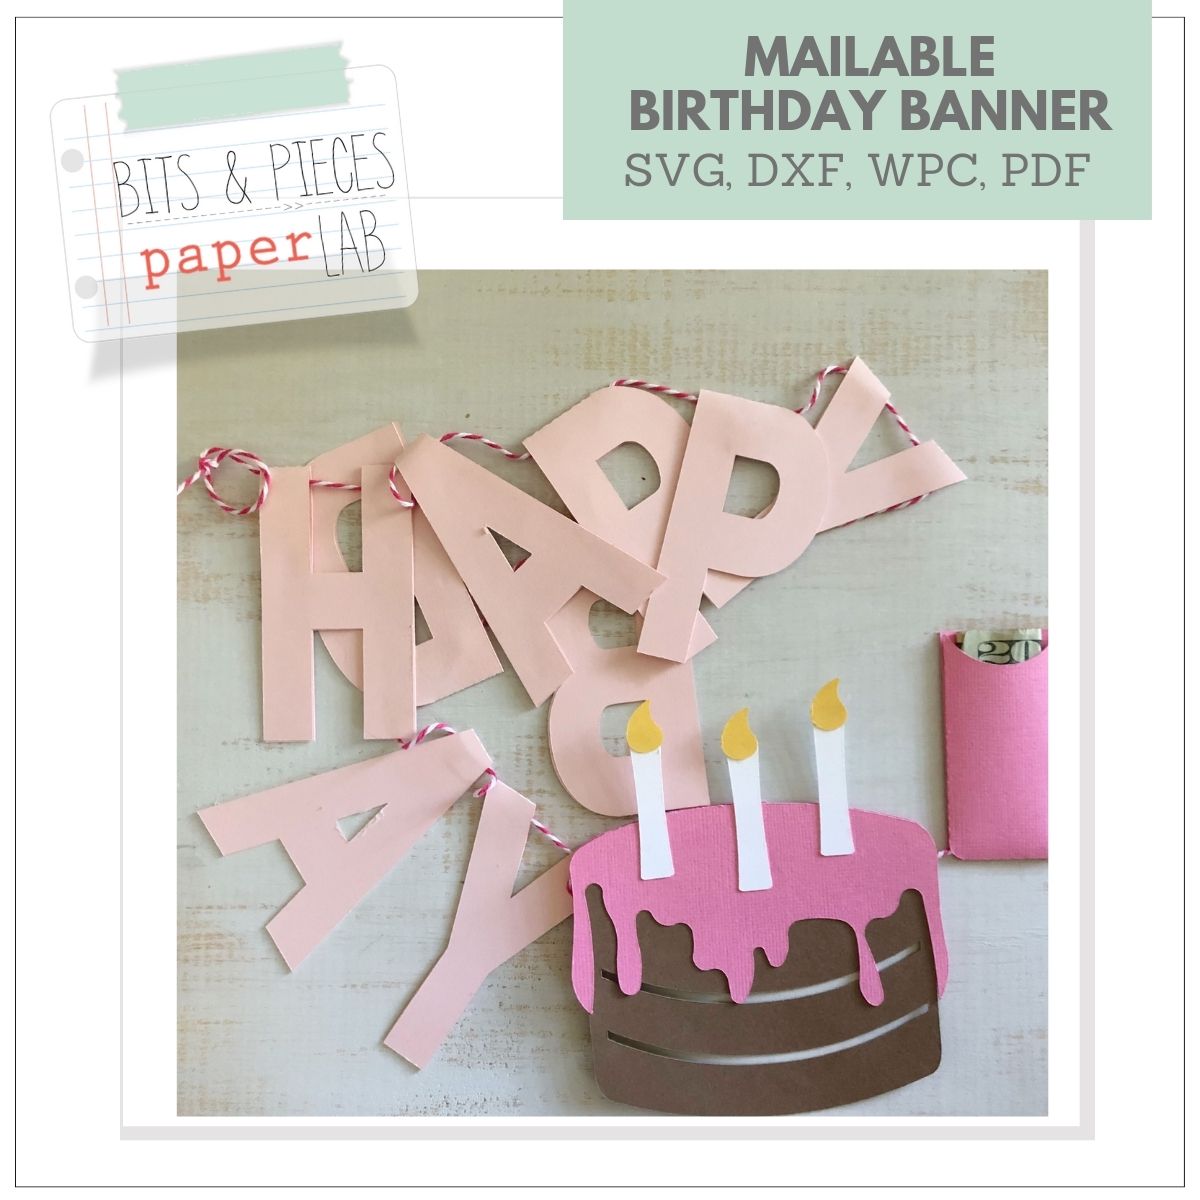 mailable birthday banner SVG project